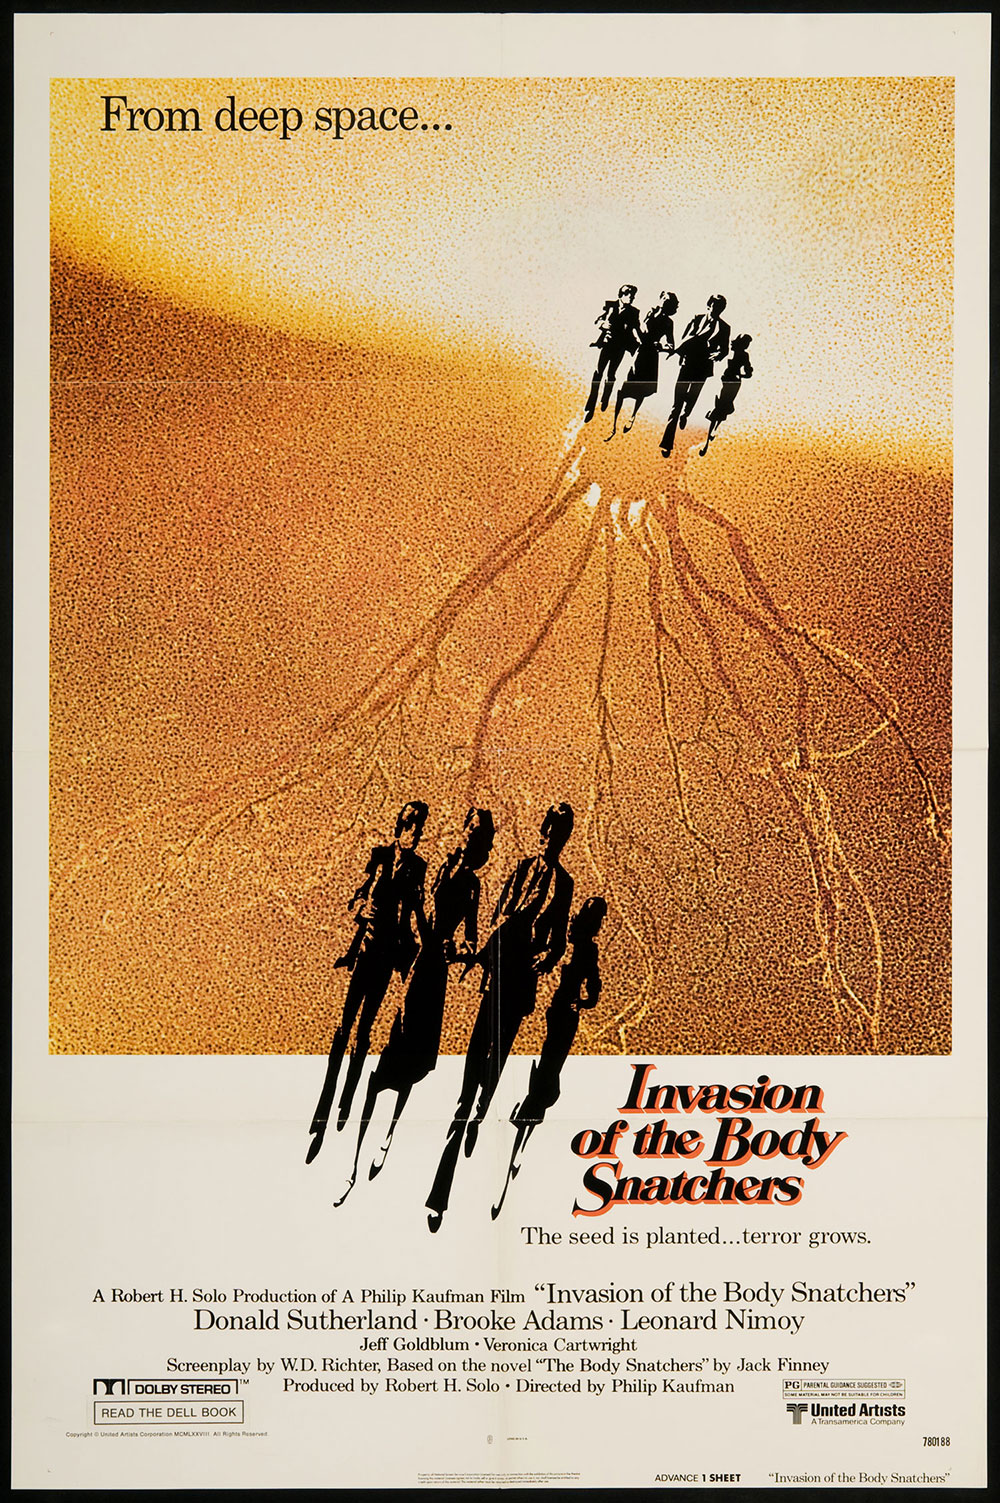 Invasion of the body snatchers (1978) Horror Land